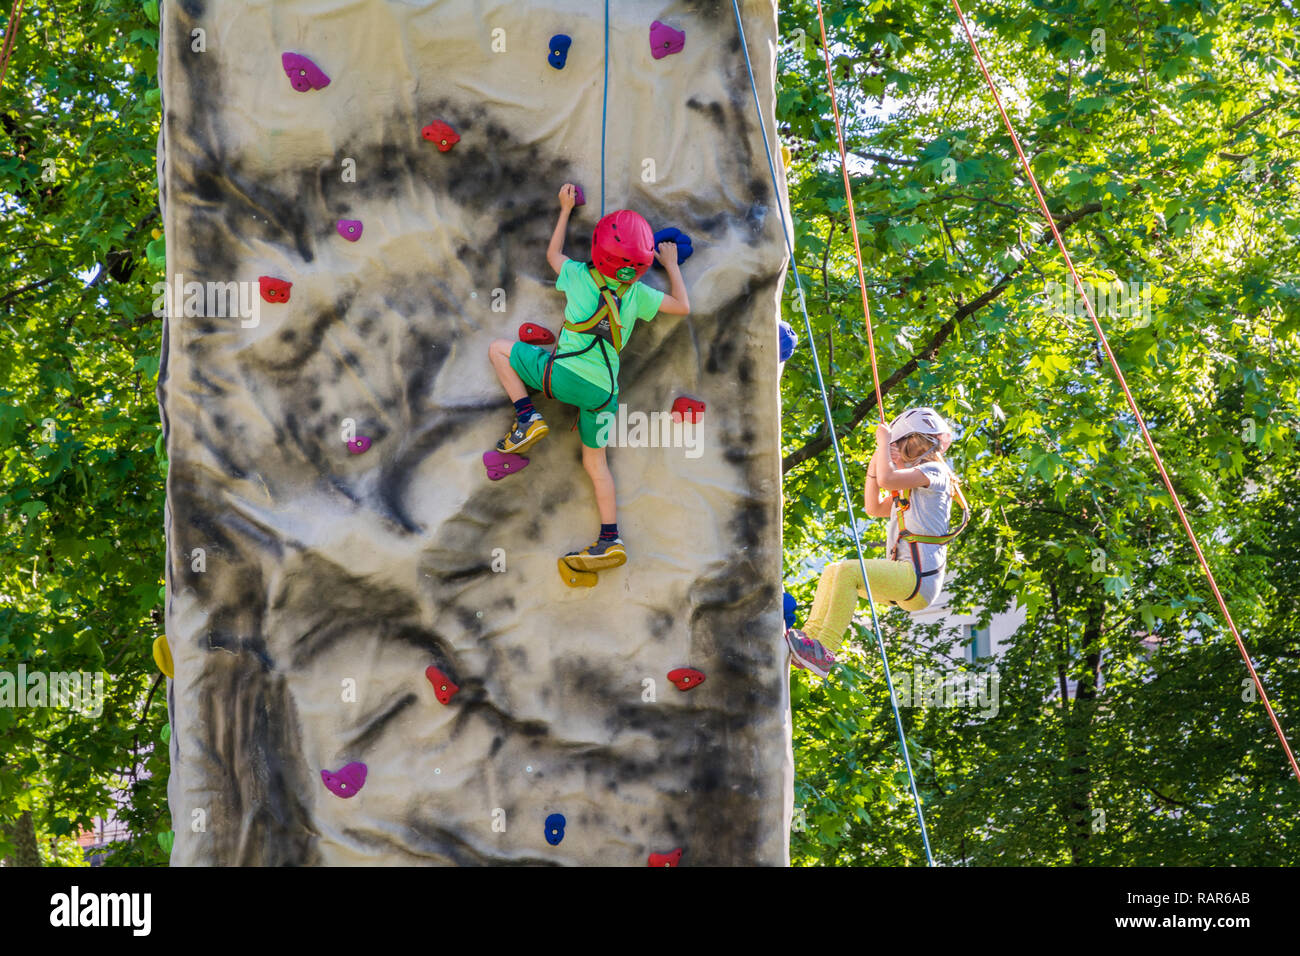 Children learning to rock climb on outdoor artificial climbing wall. Italy, north Italy, Europe Stock Photo